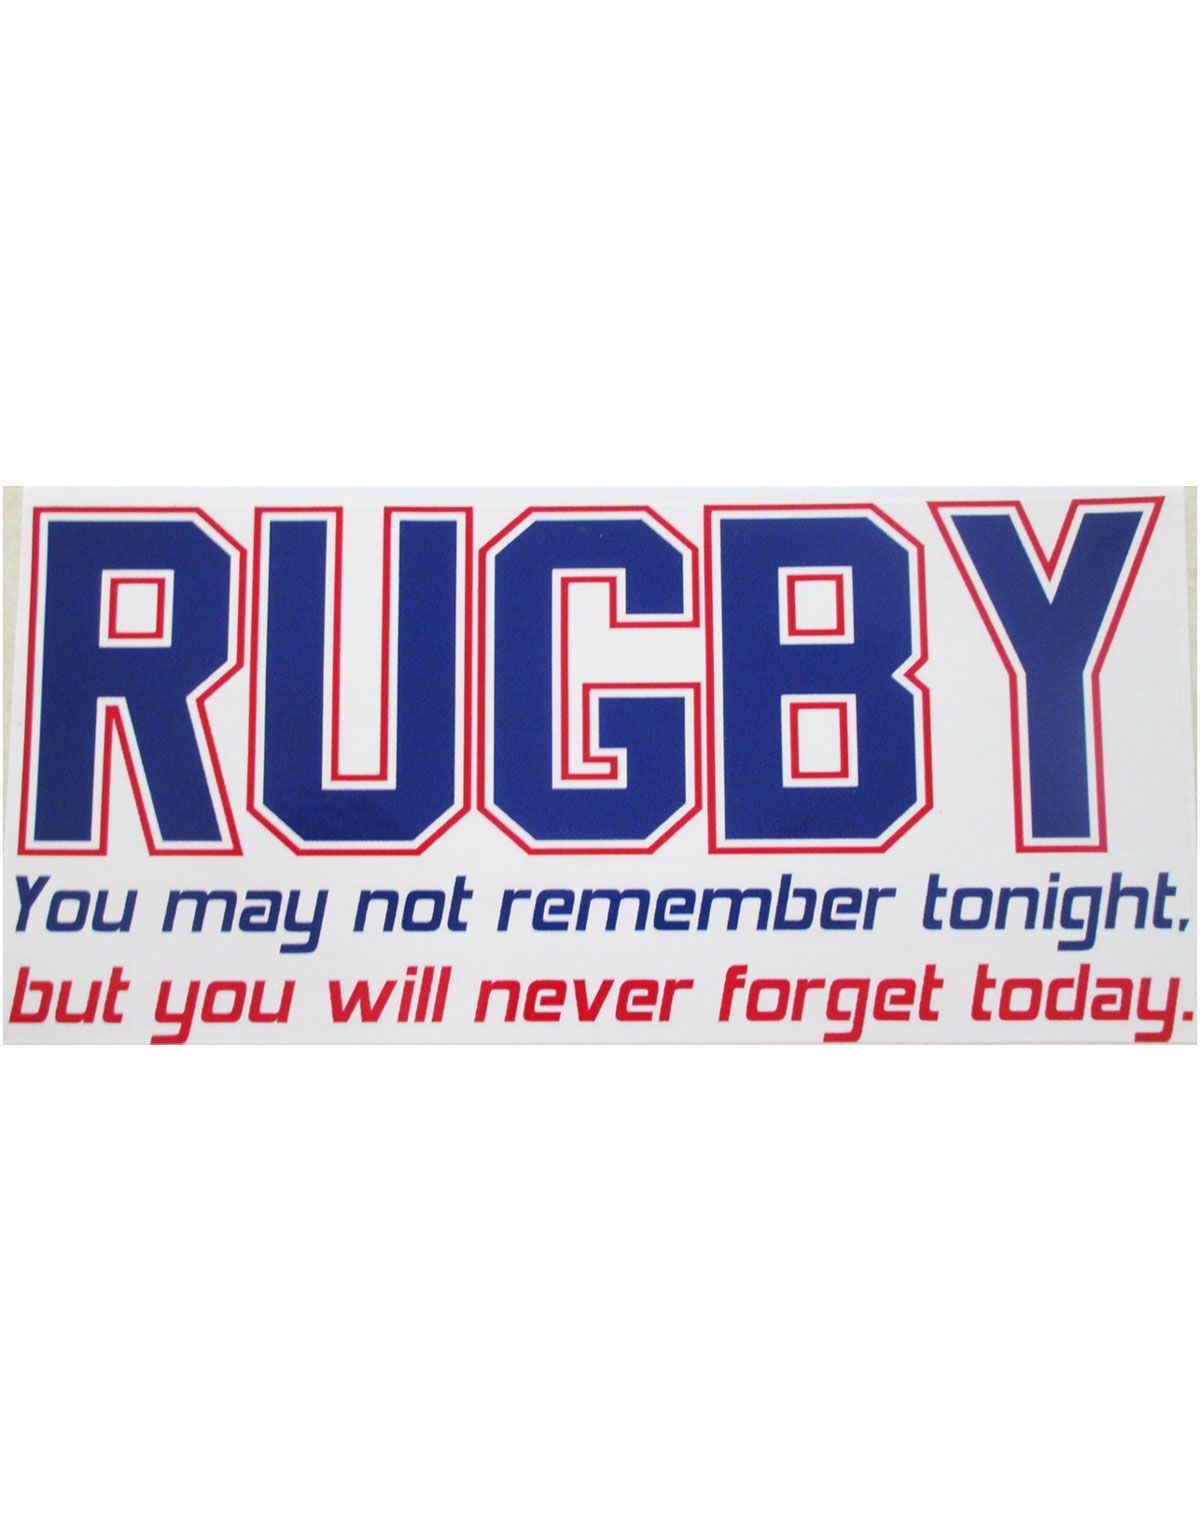 Rugby You Will Never Forget Today Sticker - U.S. Custom Stickers